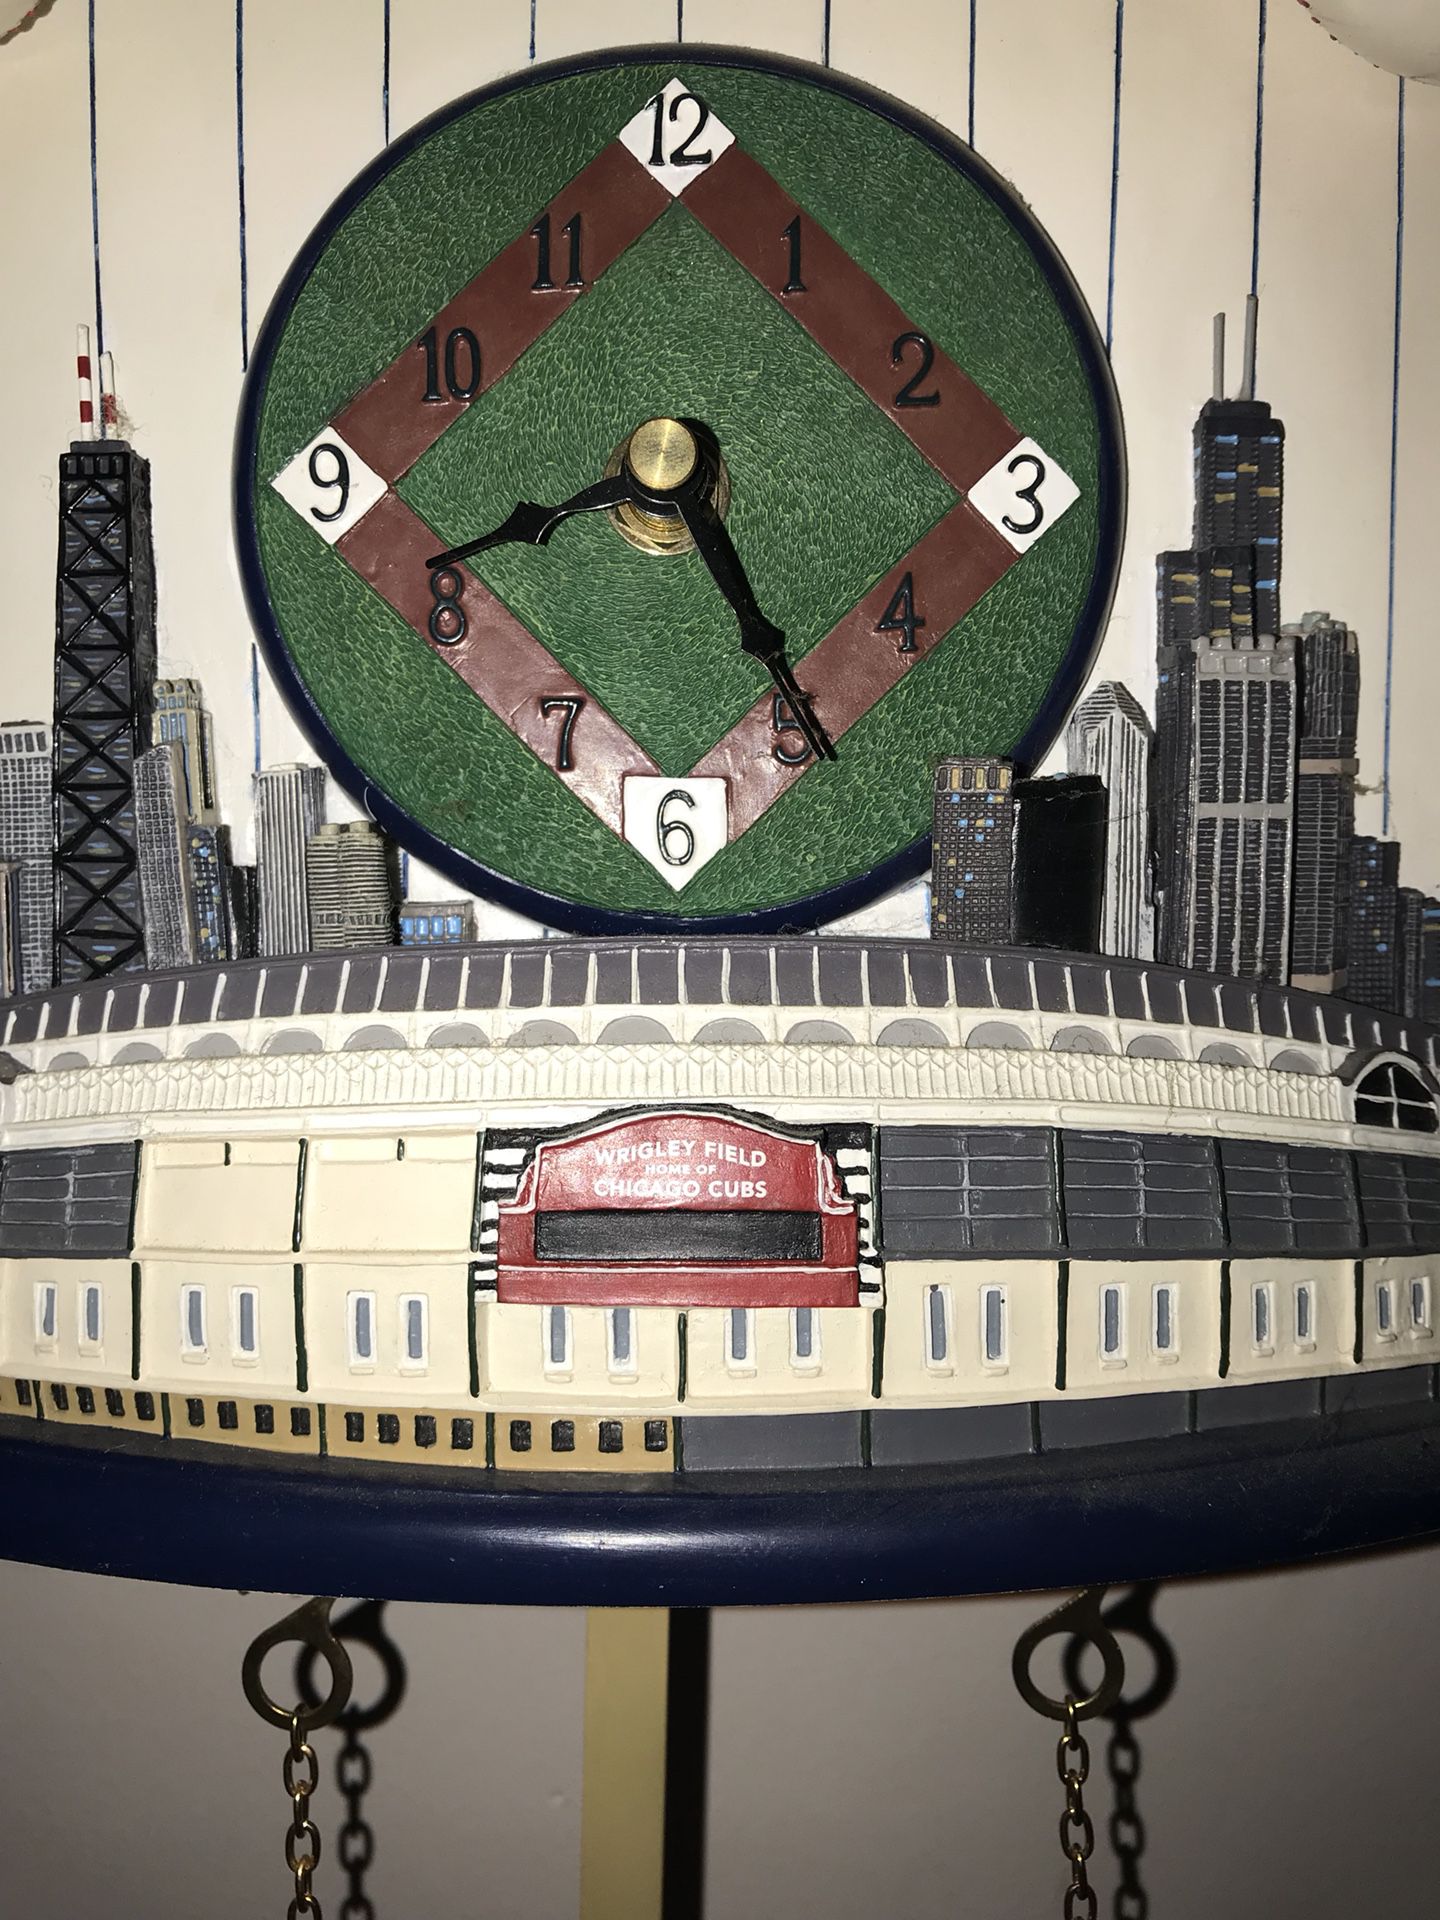 Chicago Cubs Coo Coo Clock for Sale in Skokie, IL - OfferUp